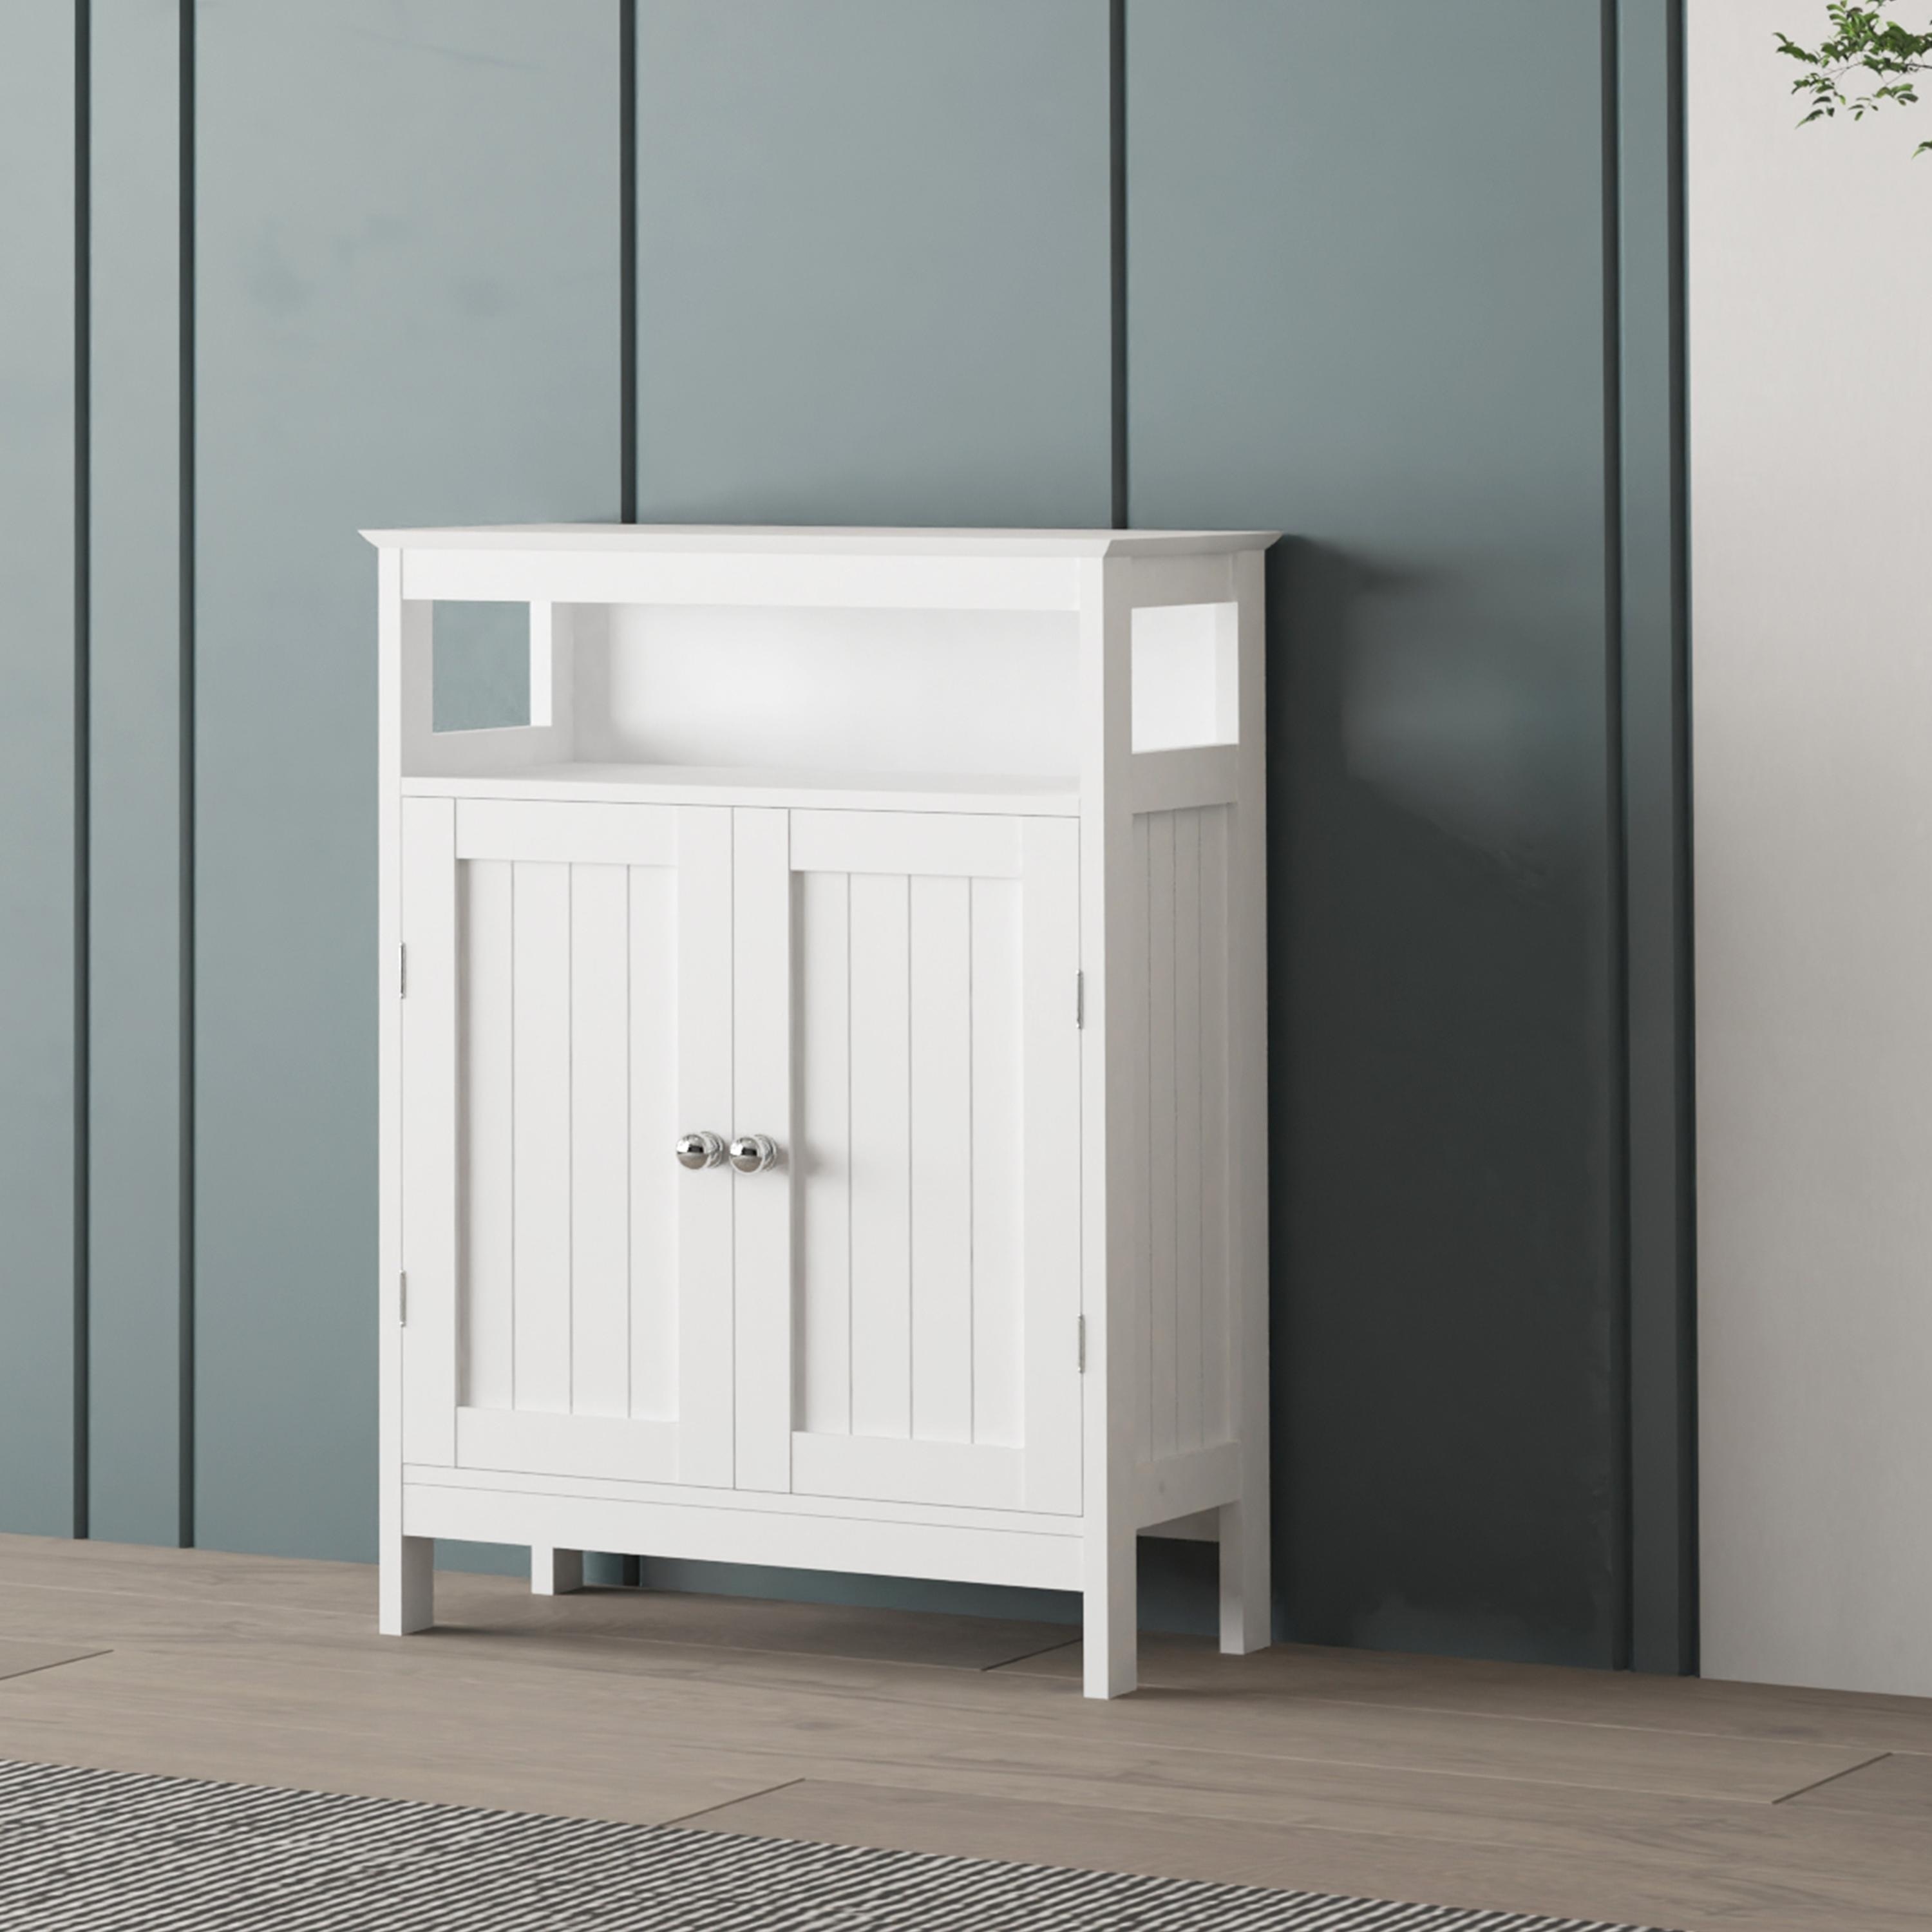 https://ak1.ostkcdn.com/images/products/is/images/direct/771936f1df41b4da4ab5492518be9256588ed0a4/Bathroom-standing-storage-cabinet.jpg